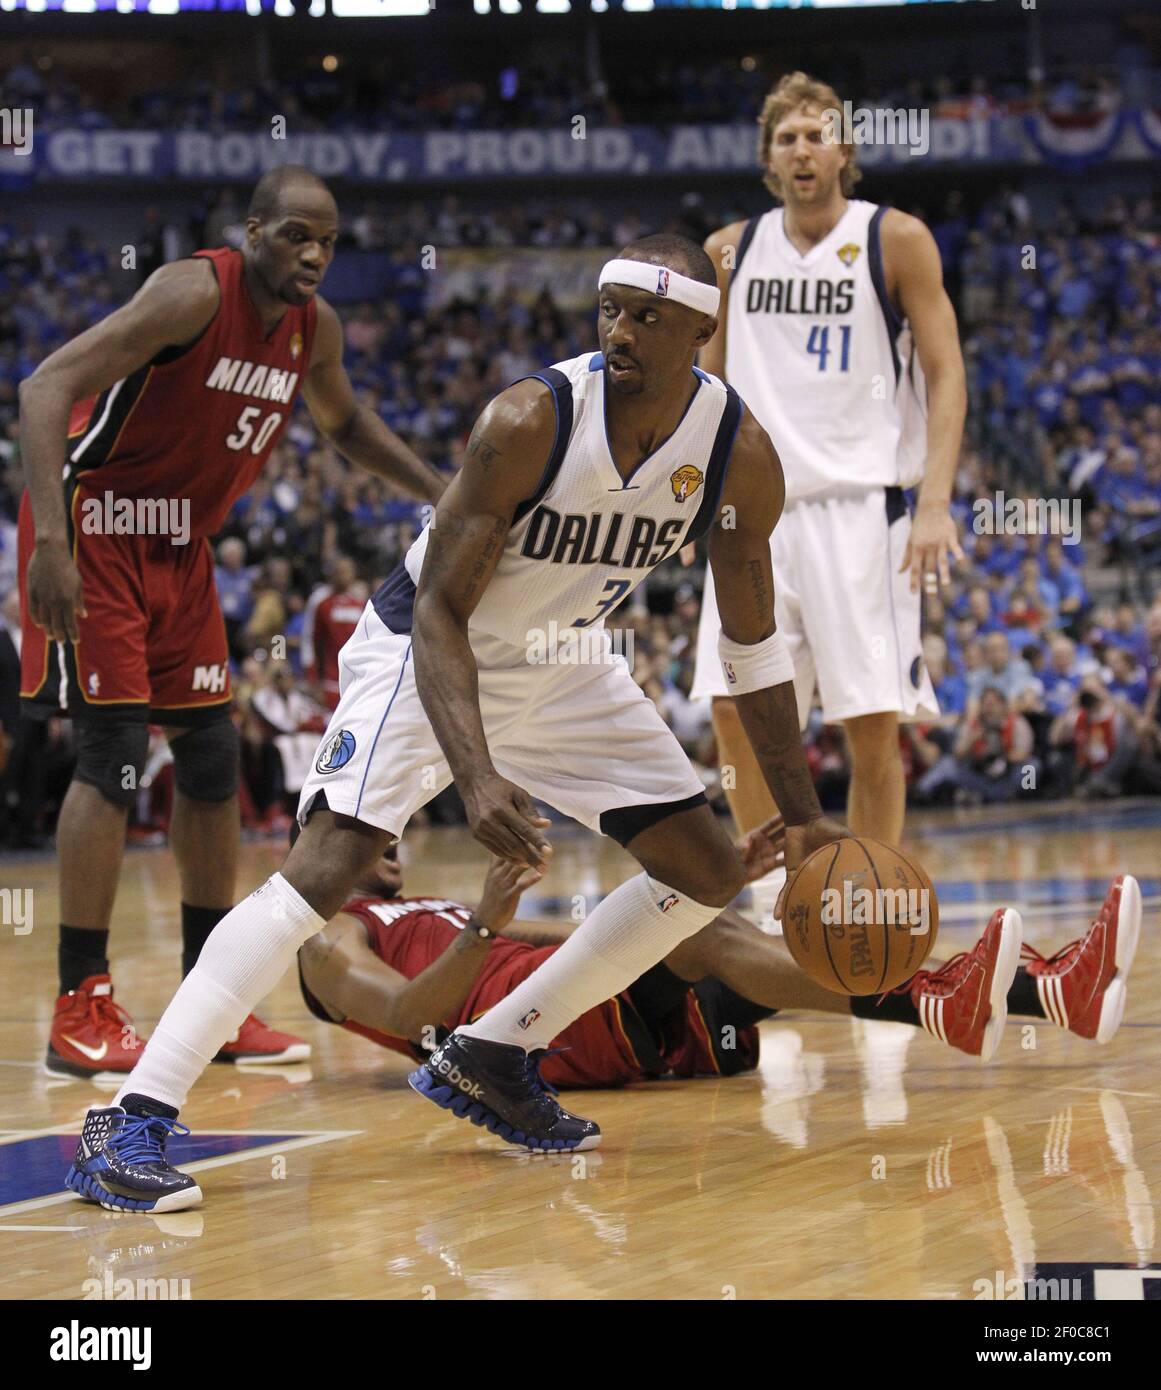 Dallas Mavericks' Jason Terry (31) dribbles as Miami Heat' Mario Chalmers  (15) falls down while Miami's Joel Anthony (50) and Dallas' Dirk Nowitzki  (41) look on at the AmericanAirlines Center in Dallas,